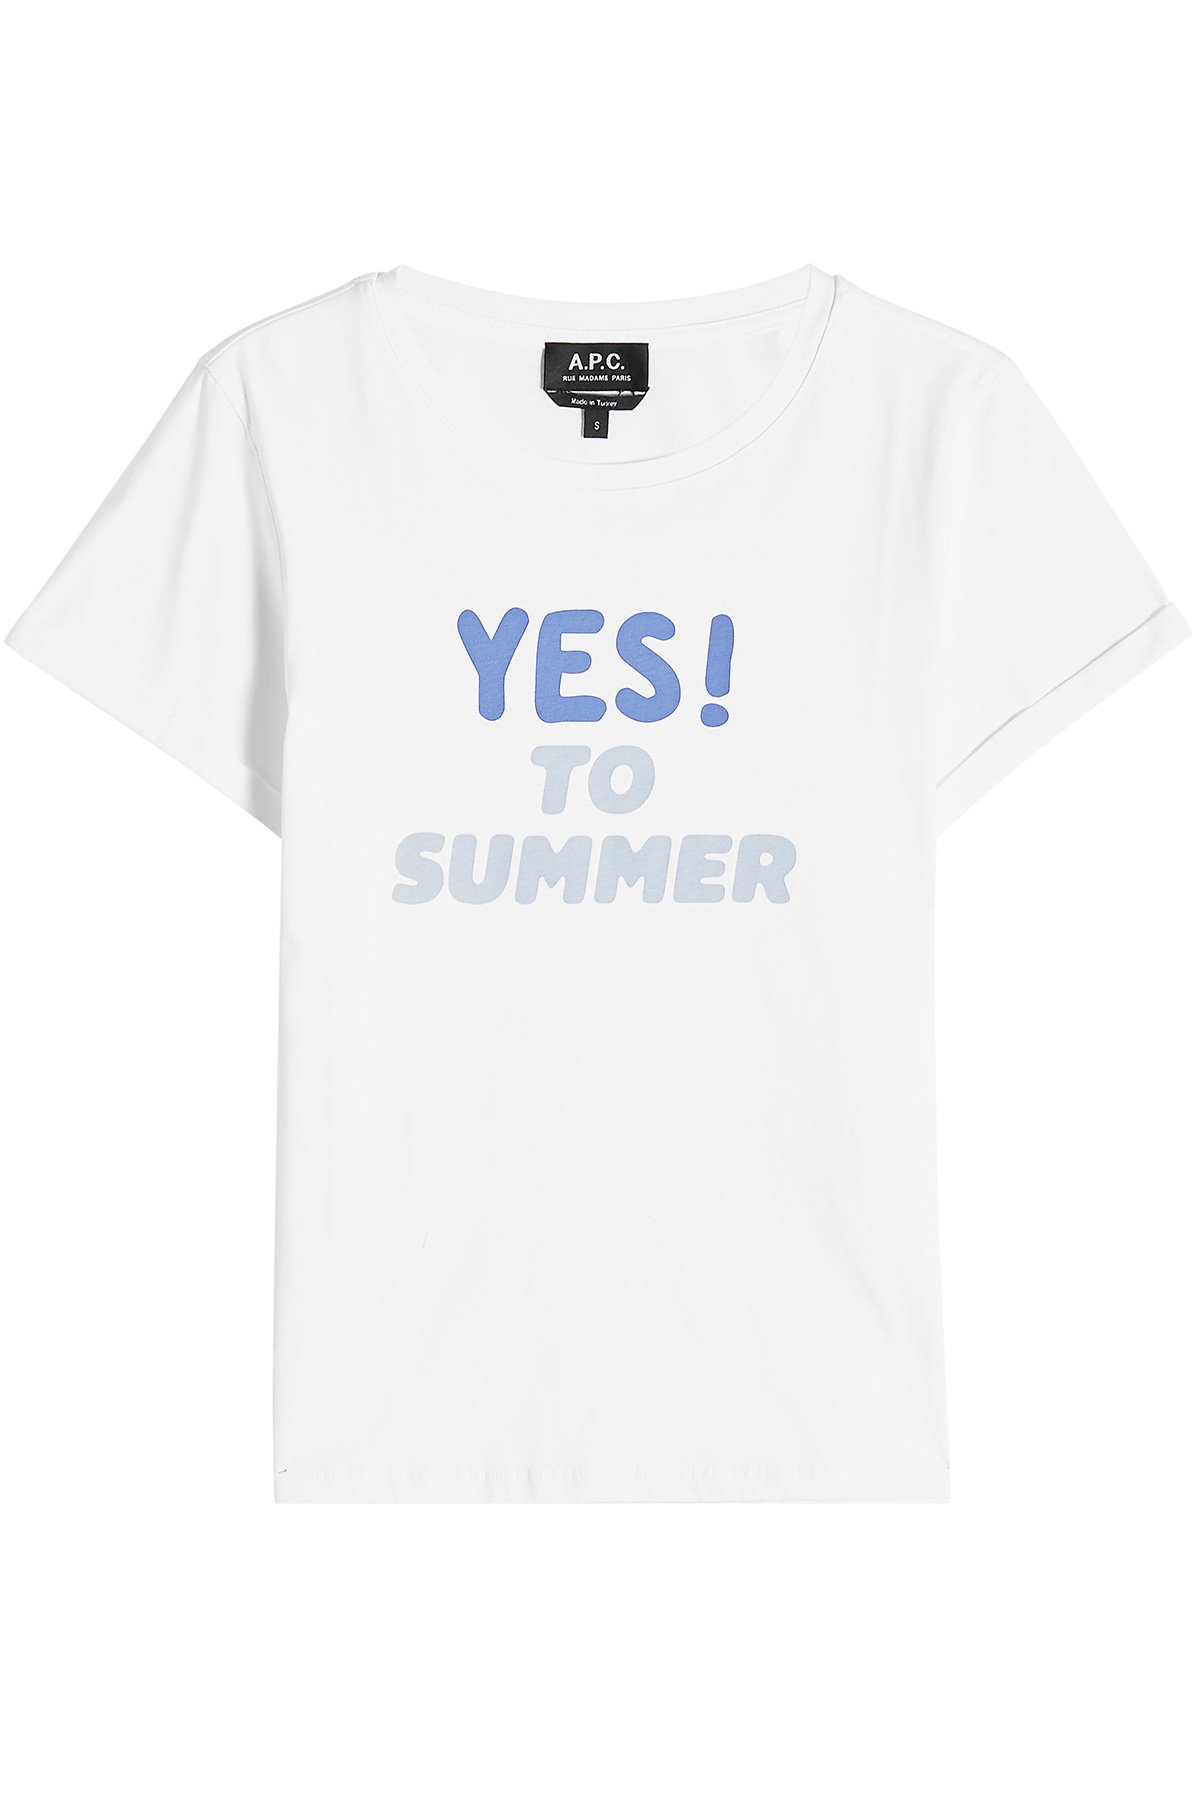 Yes! To Summer Cotton T-Shirt by A.P.C.